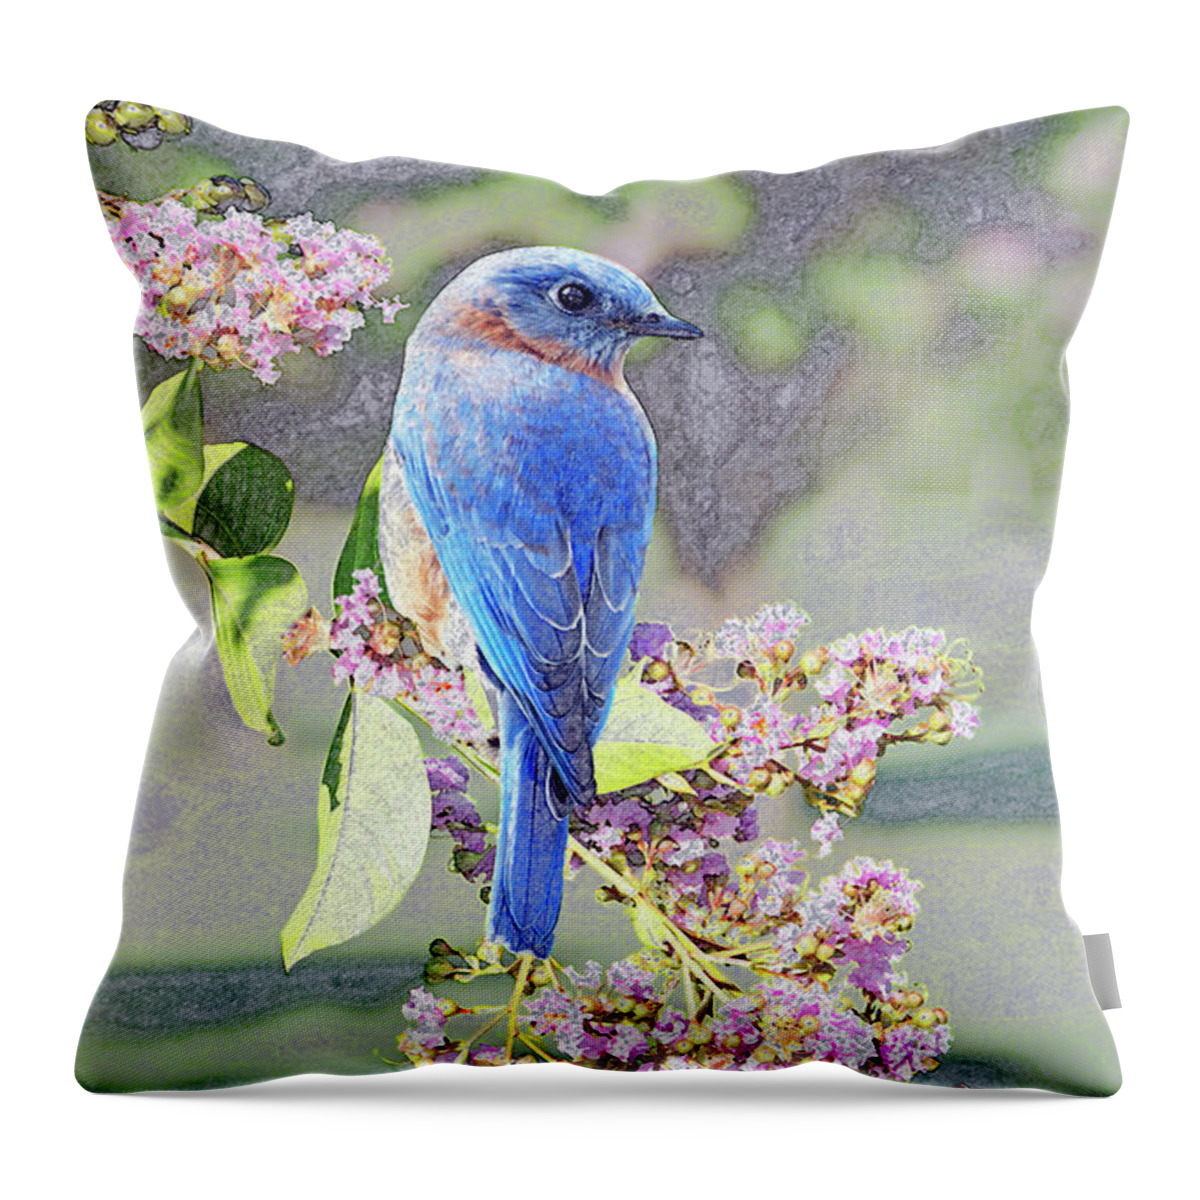 Bluebirds Throw Pillow featuring the photograph Bluebird On Pink by Jamie Pattison